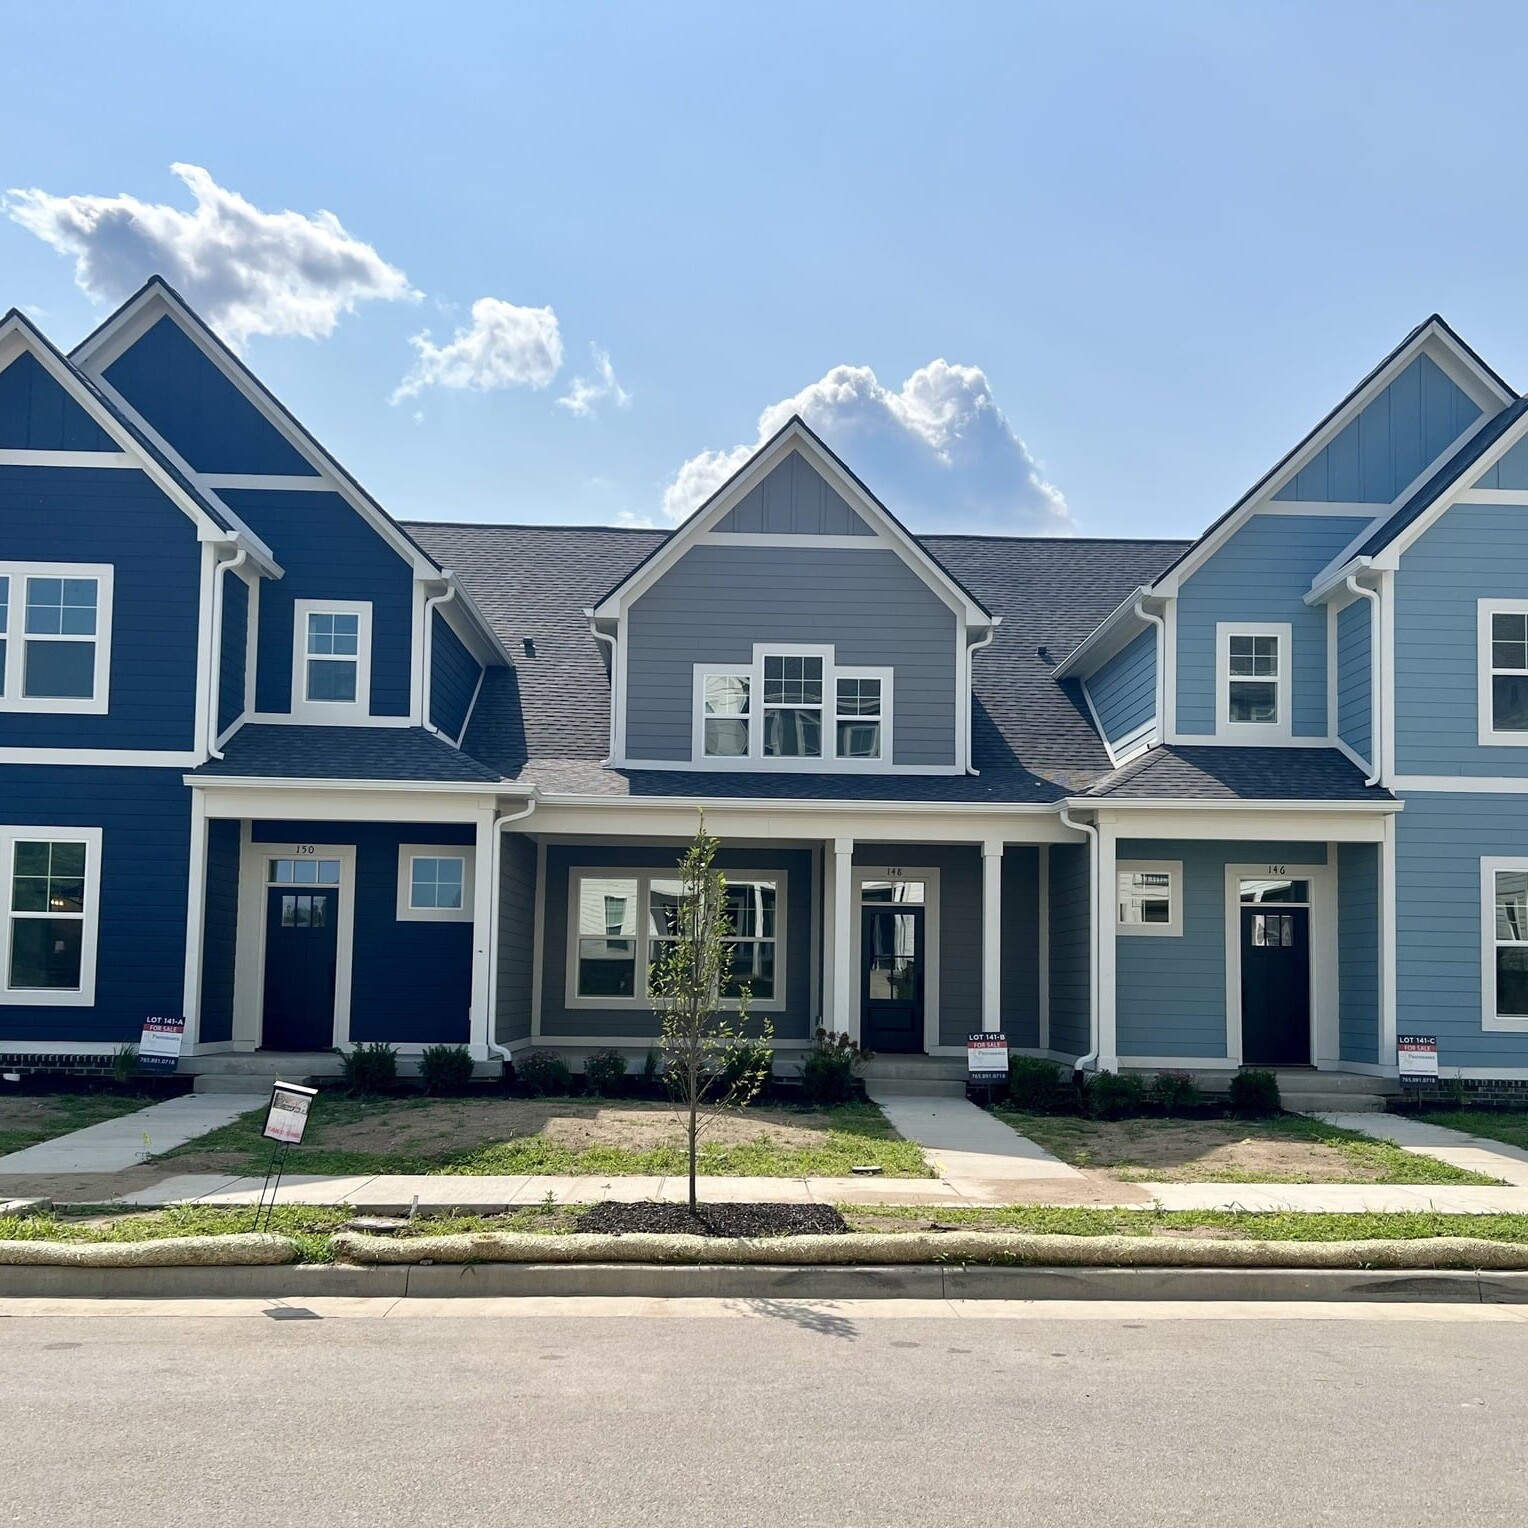 A row of blue and white townhouses on a street, custom-built by a Luxury custom home builder Westfield Indiana.